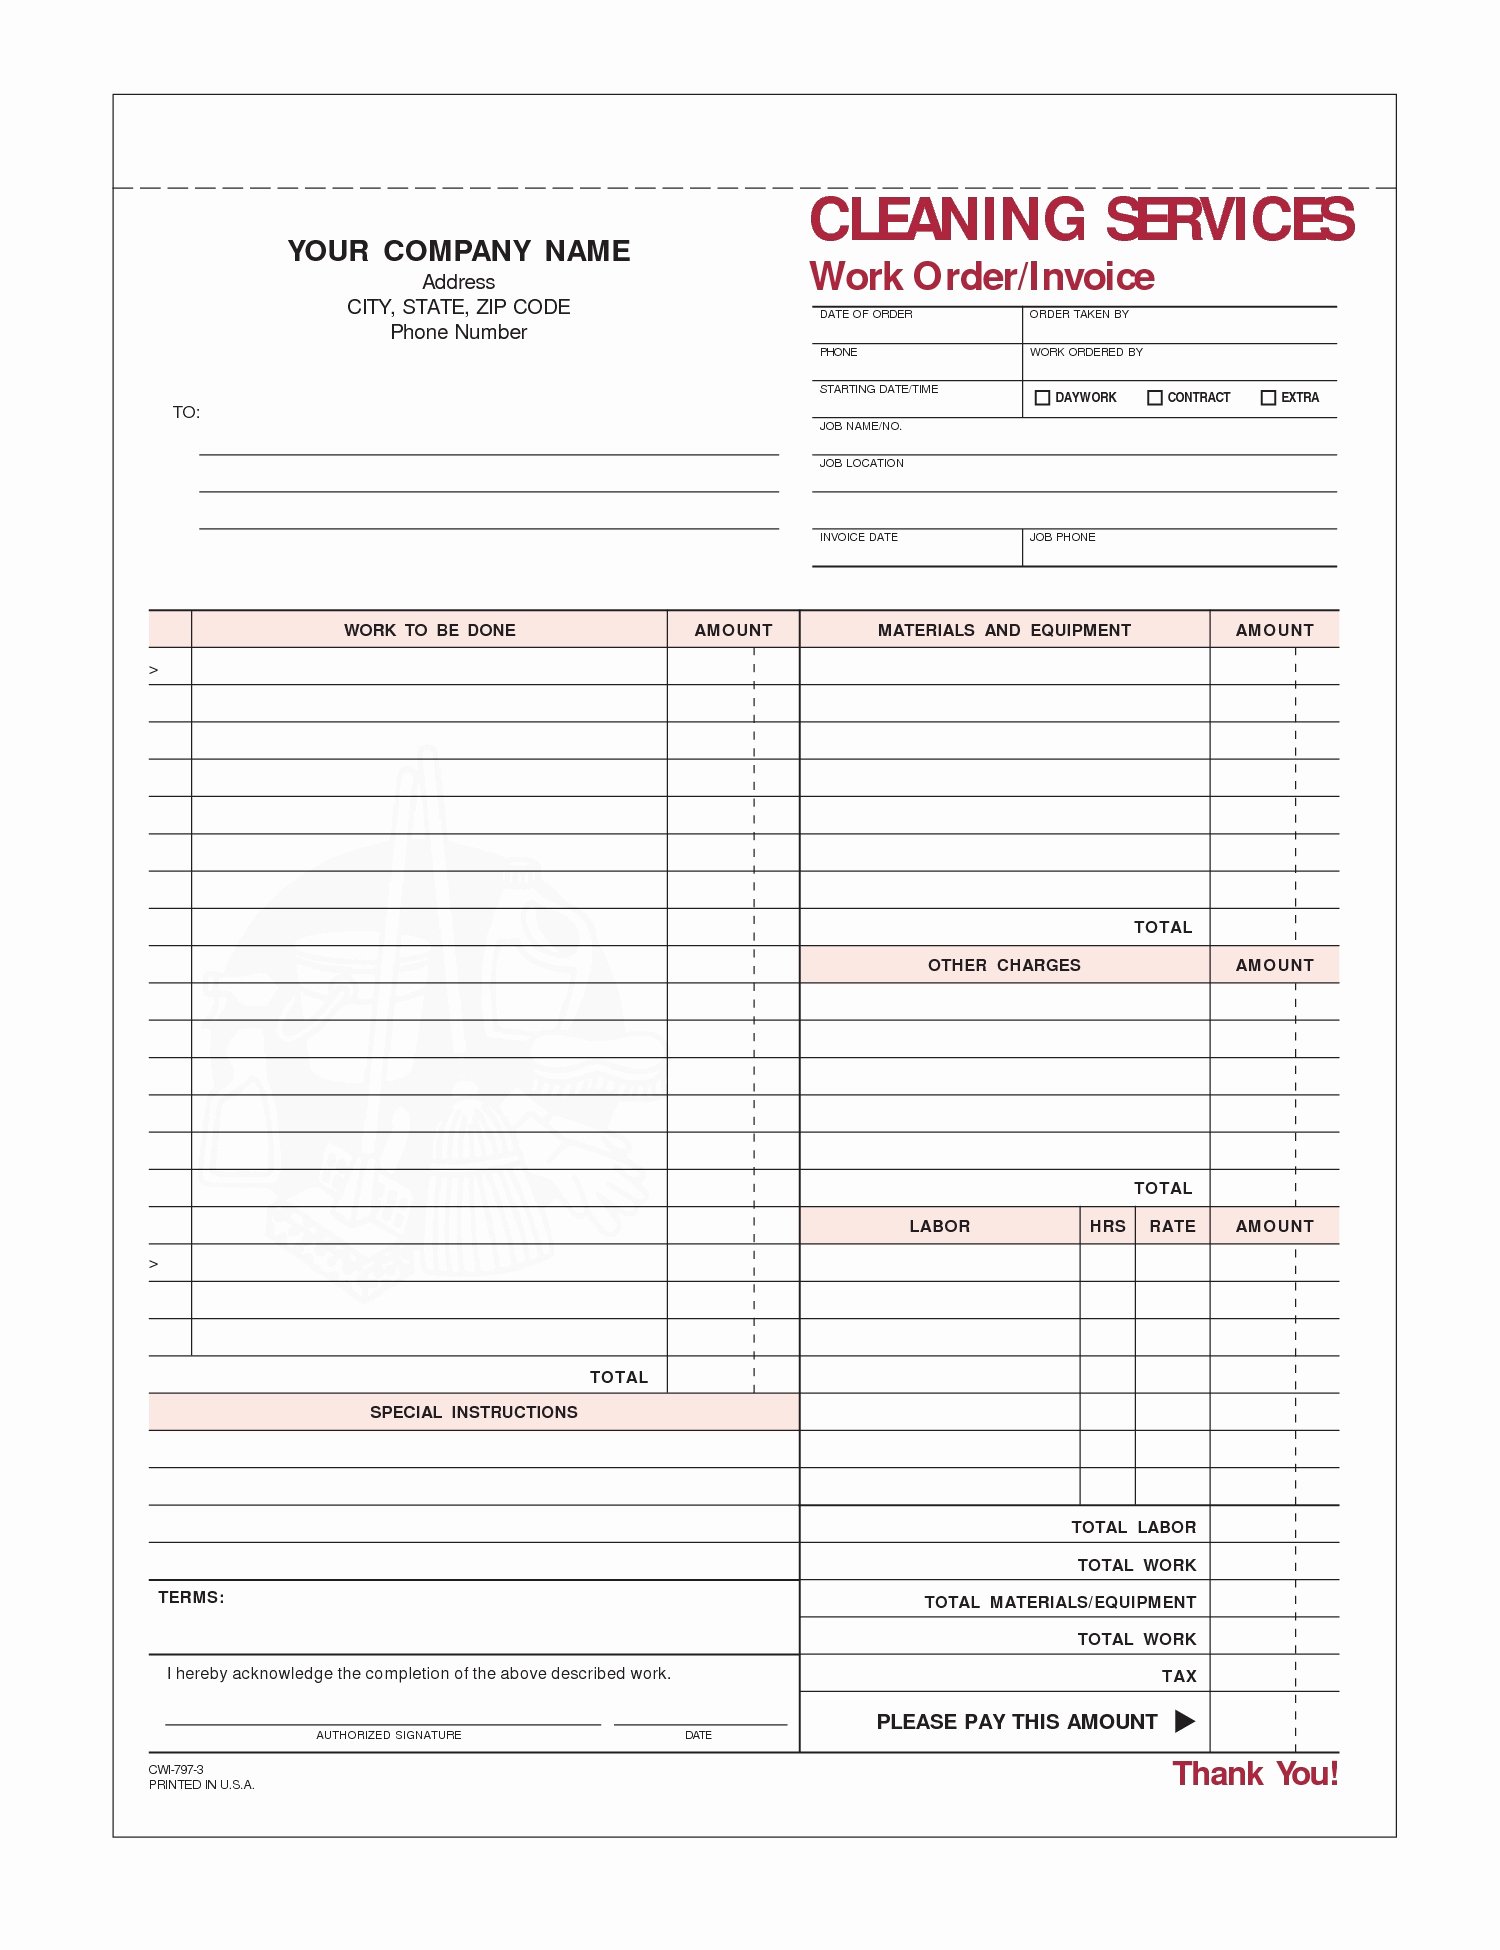 Sample Cleaning Invoice Invoice Template Ideas